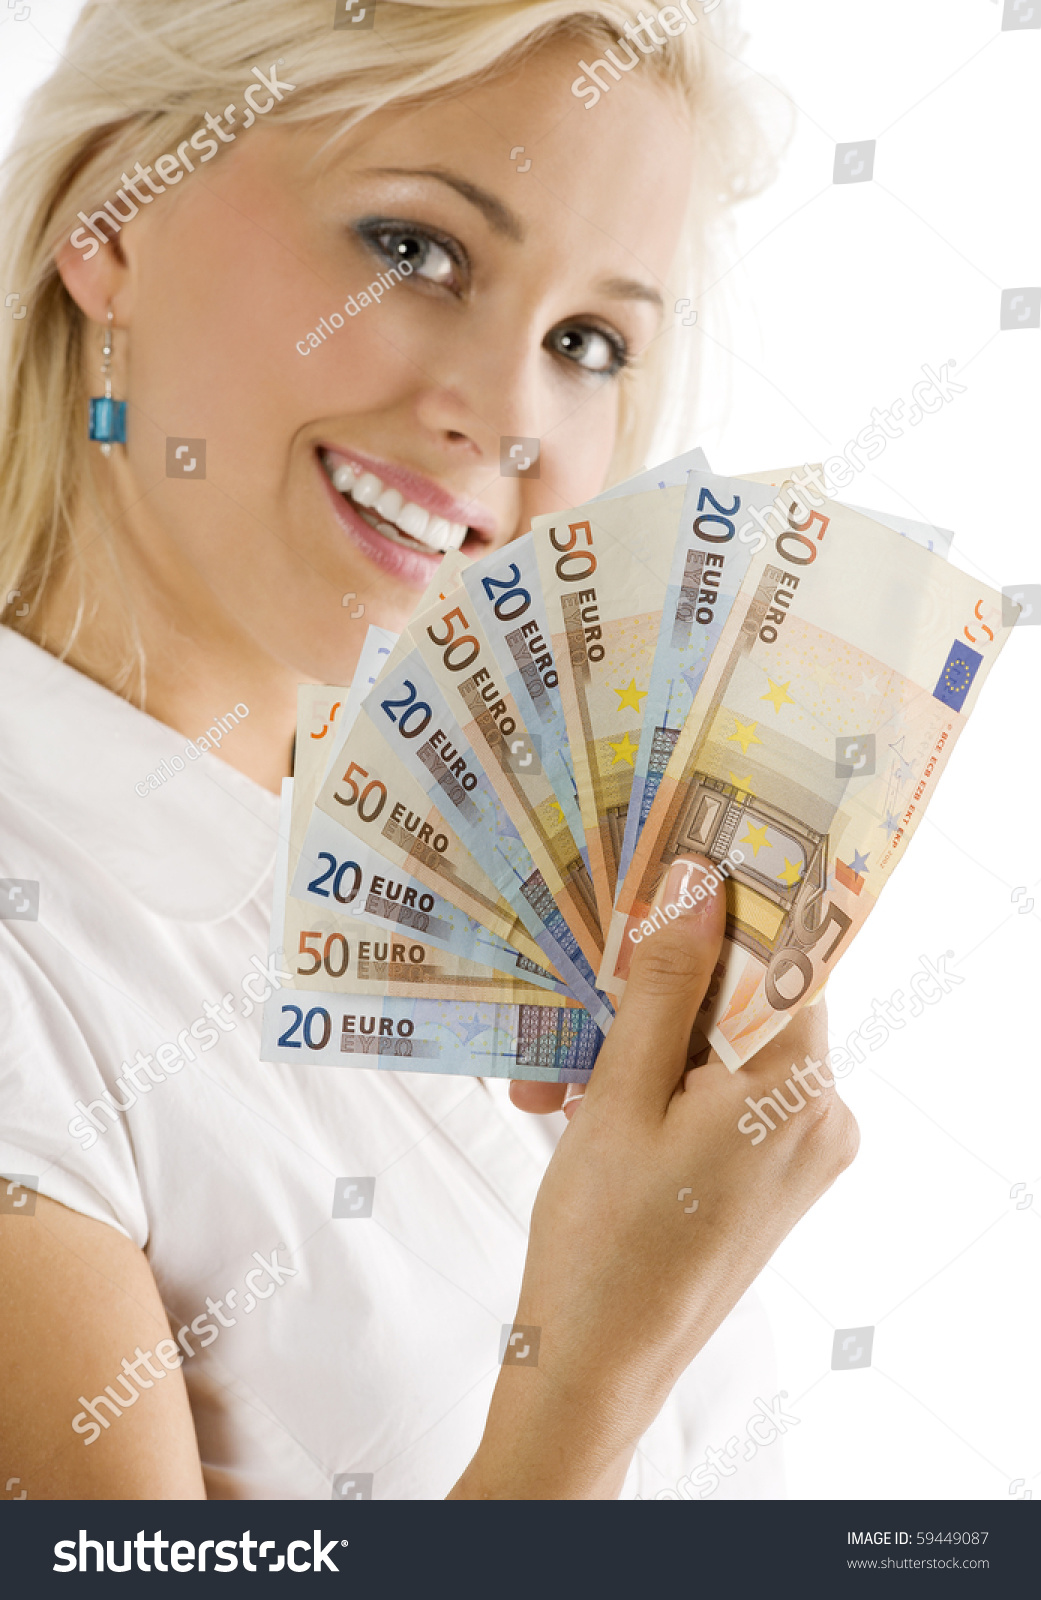 smiling girl keeping a fan of euro cash . FOCUS ON THE MONEY . FACE NOT IN FOCUS #59449087